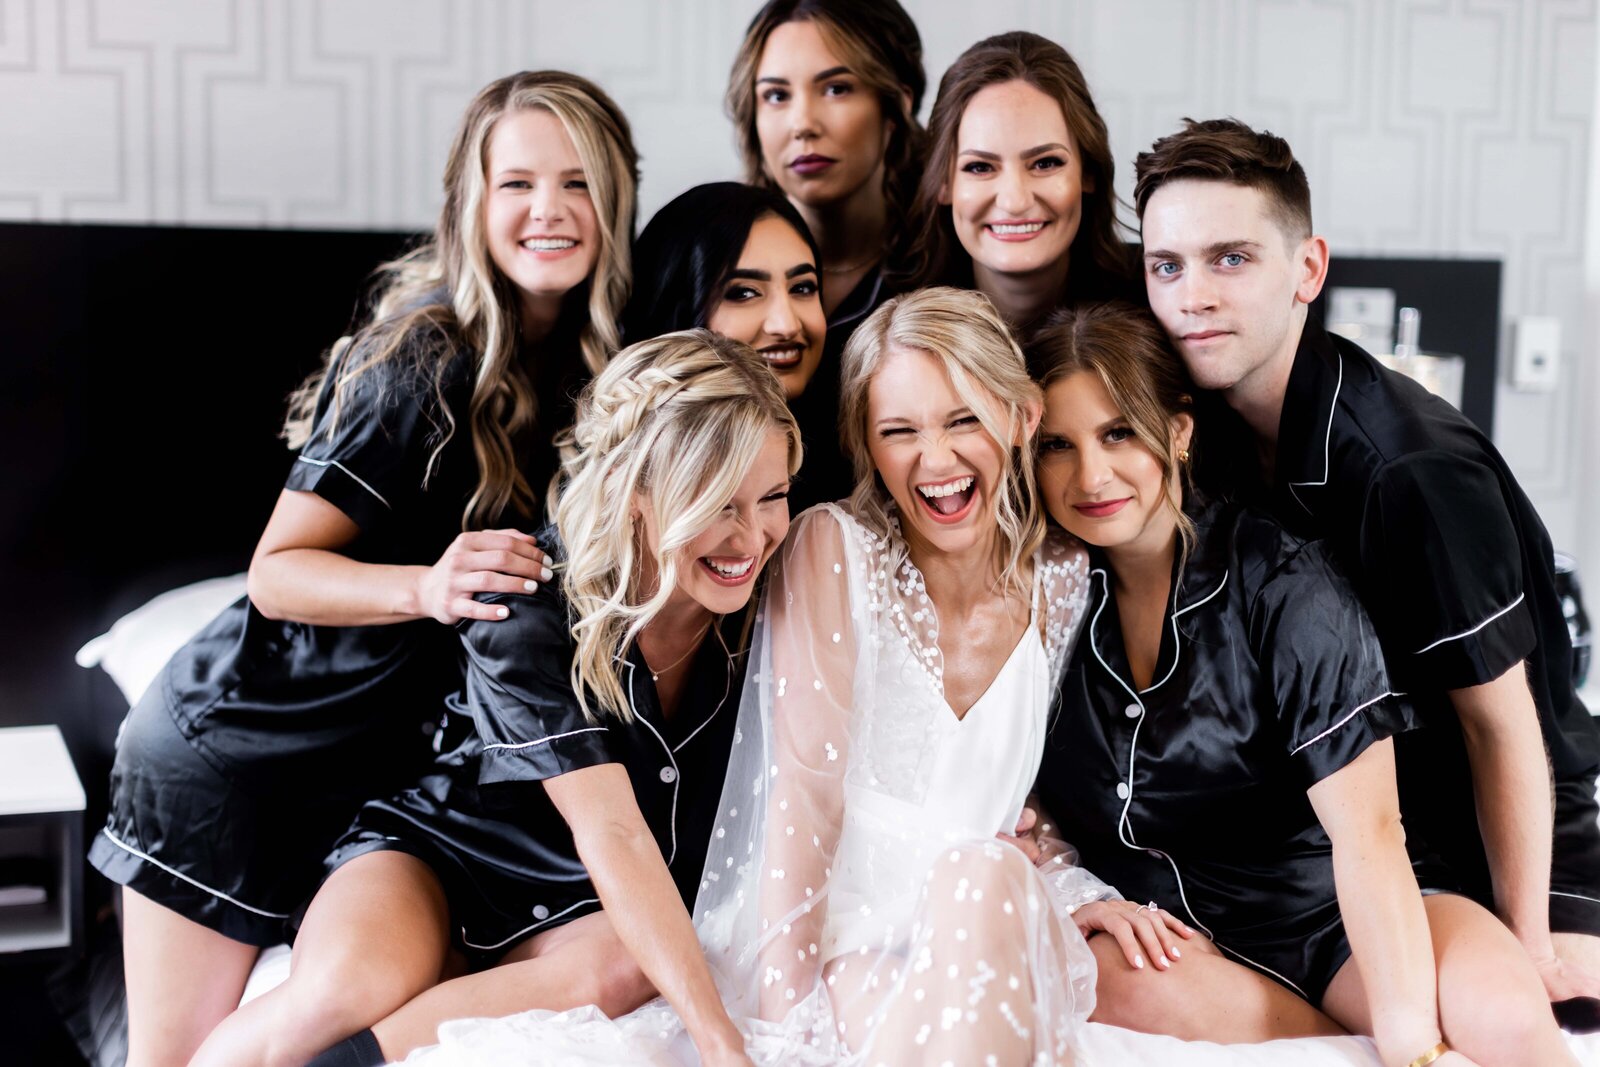 Discover the stylish and fun preparation moments with Hailey and her bridesmaids in matching robes, beautifully captured at her wedding. Our photo captures the joy and excitement of the bridal party getting ready together, highlighting their elegant robes and radiant smiles. Browse our collection for more vibrant and memorable bridal prep photos.